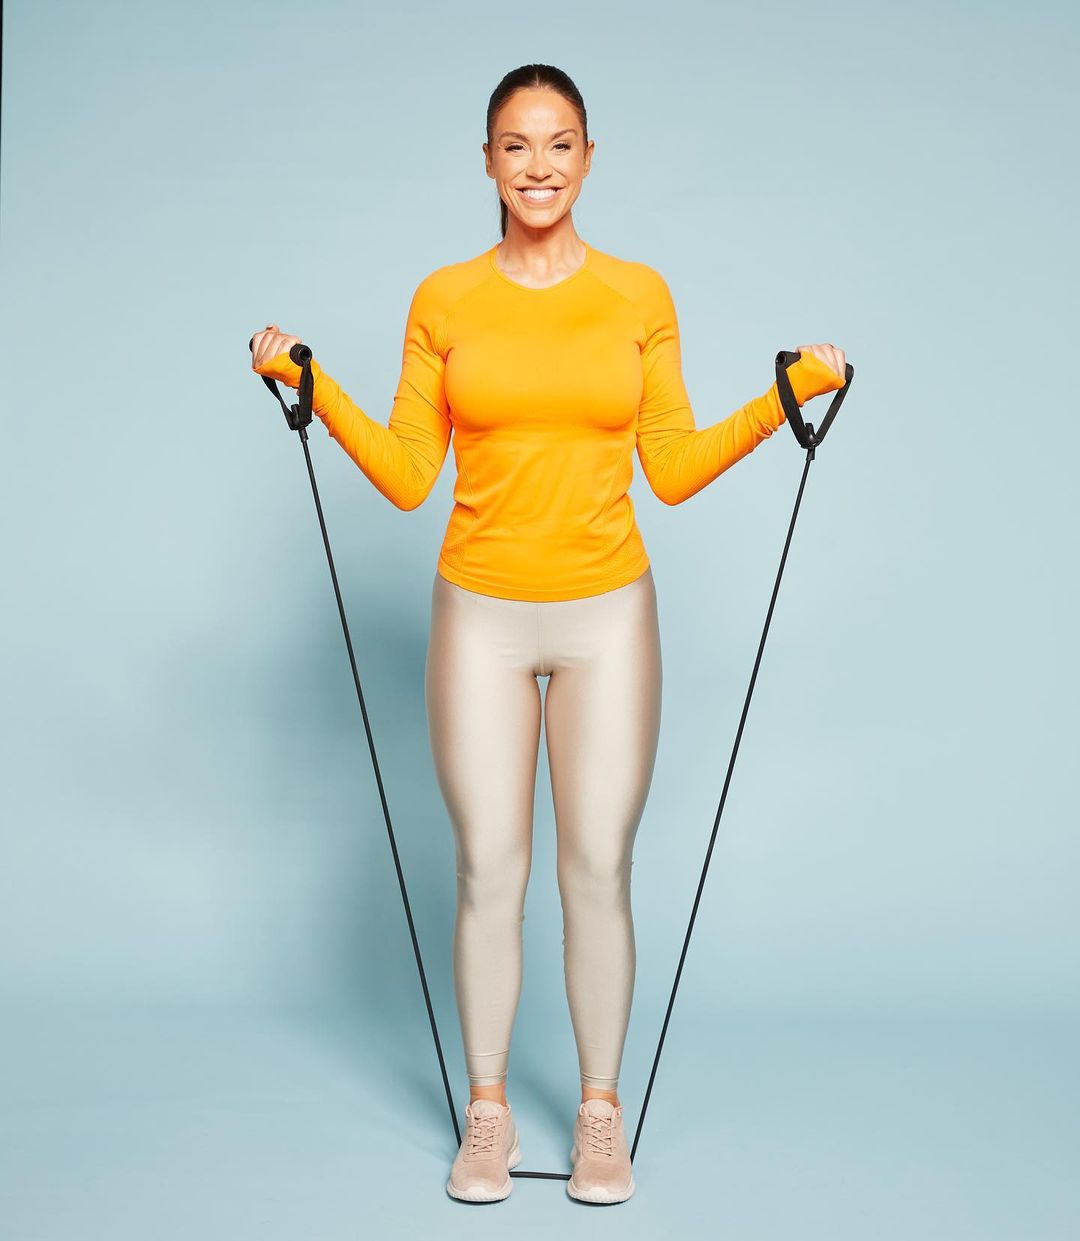 Television personality Vicky Pattison fitness photoshoot with resistance band for Fabulous Magazine wearing a orange t-shirt, silver leggings and skin color shoes